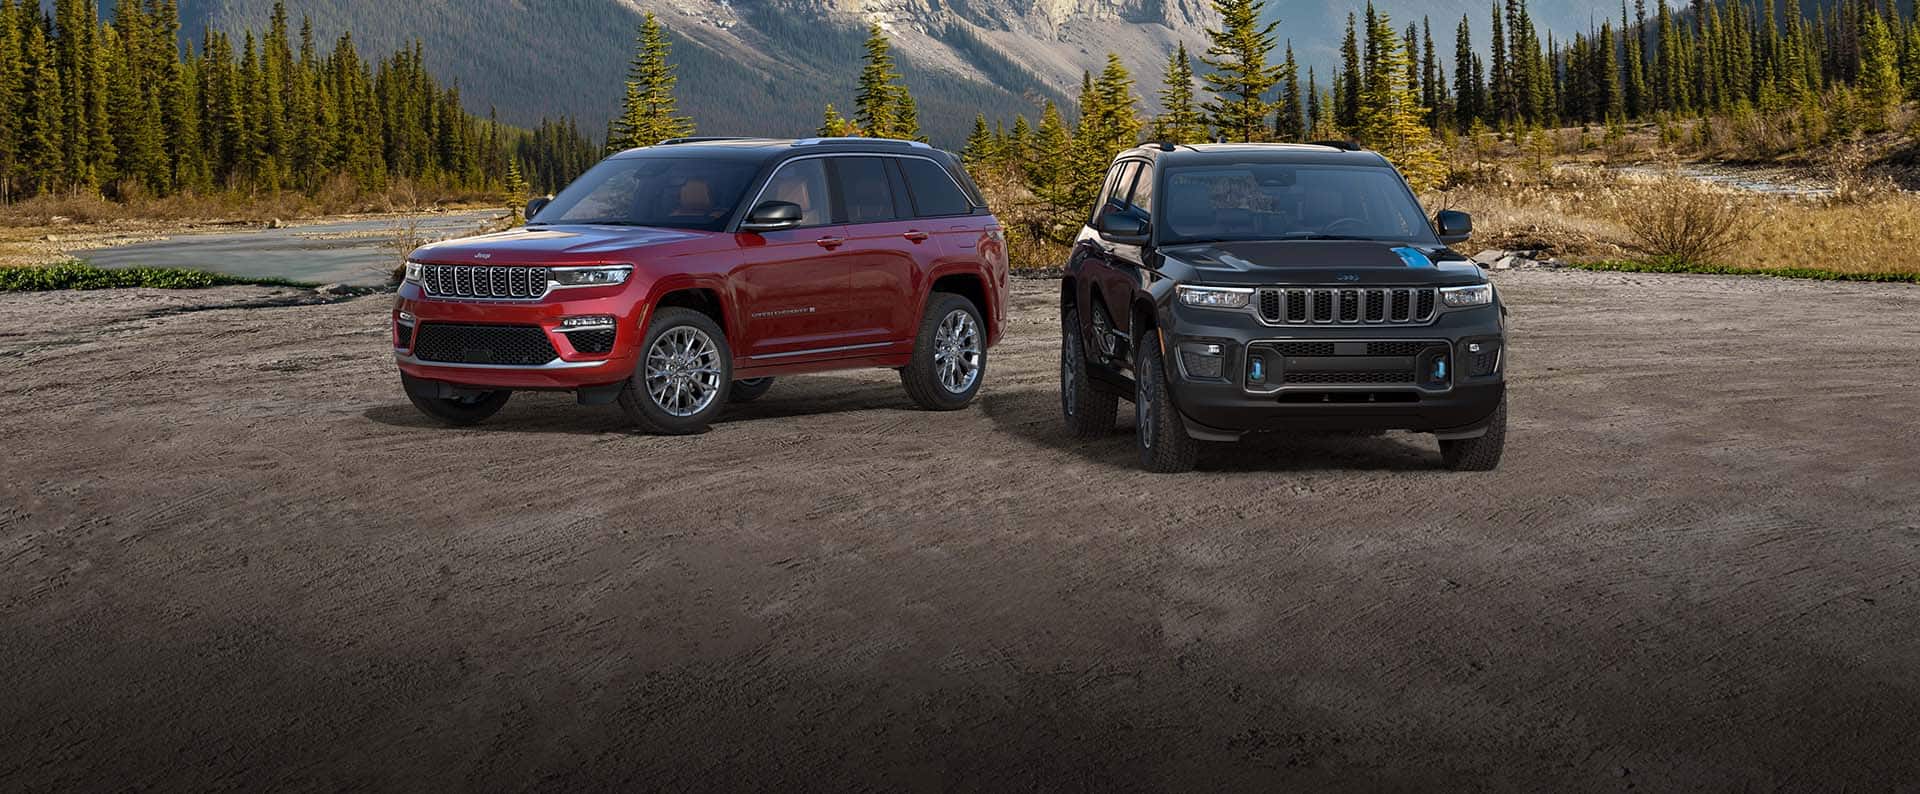 Jeep® Grand Cherokee Pricing & Specs Awarded SUV Ever